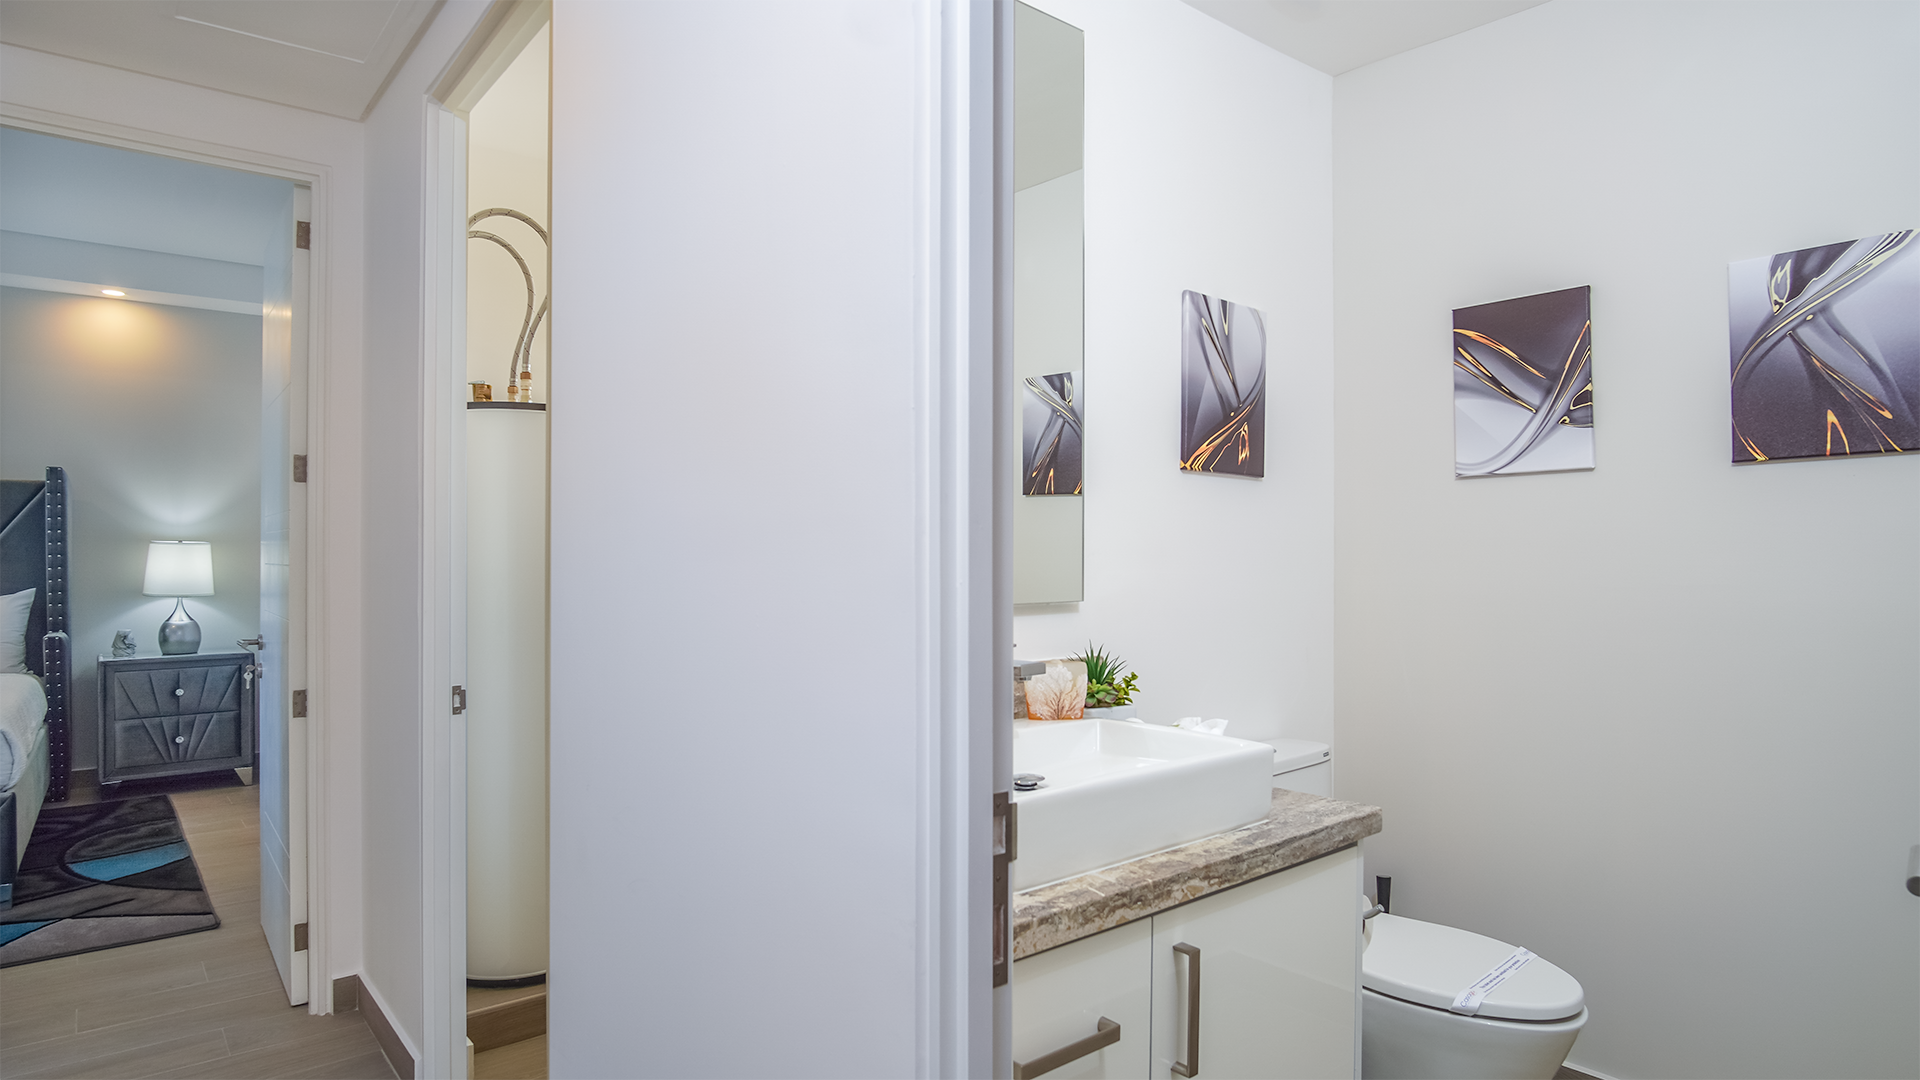 Off of the main hall you will find the guest bathroom, as well as a utility room.